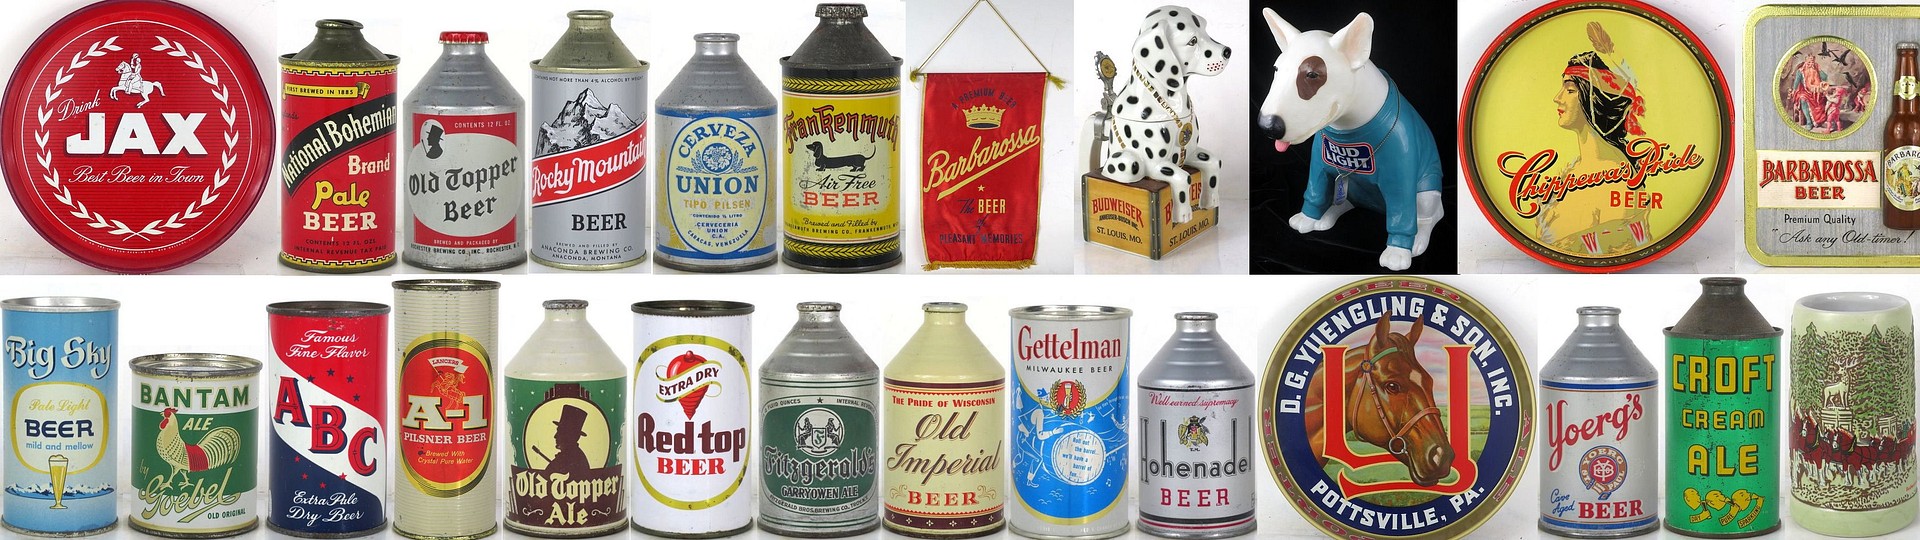 TavernTrove's Black Friday! Beer Can and Breweriana Auction by TavernTrove